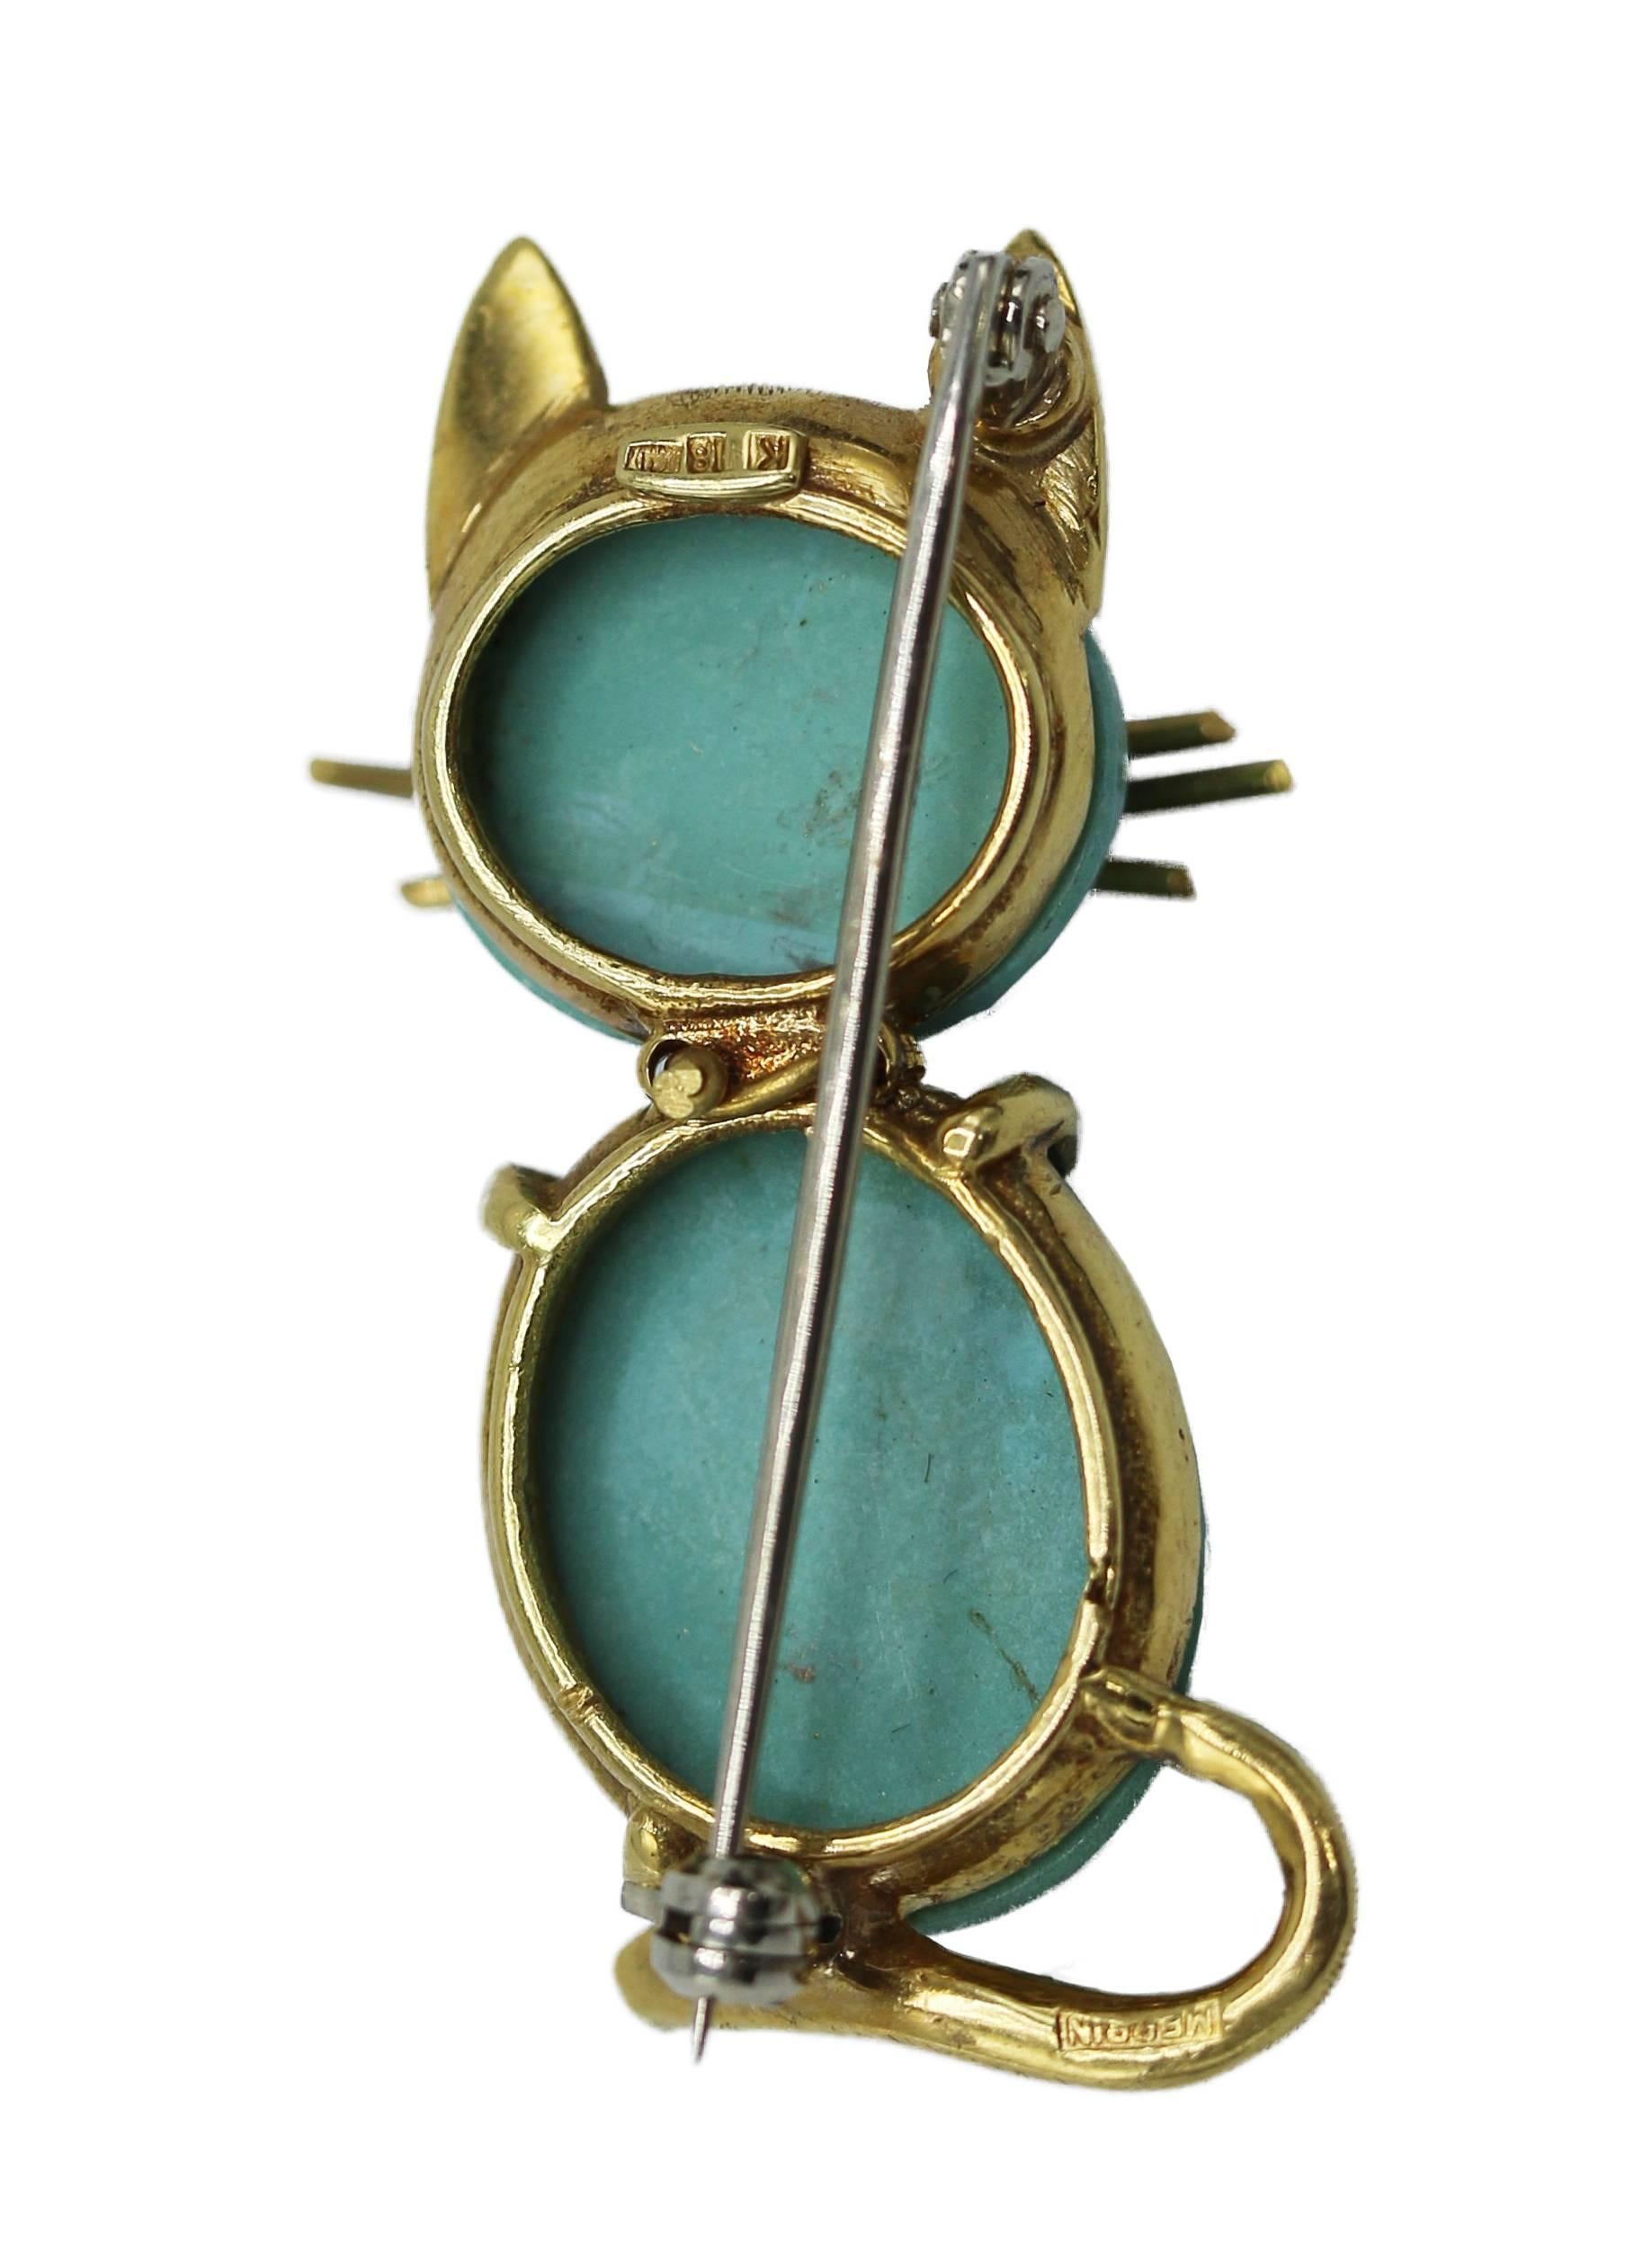 18 karat yellow gold, turquoise and ruby cat brooch, circa 1960, designed as a seated cat composed of 2 turquoise cabochons and eyes set with round rubies, the whiskers, ears and tail of textured gold, gross weight 11.7 grams, measuring 1 1/2 by 3/4